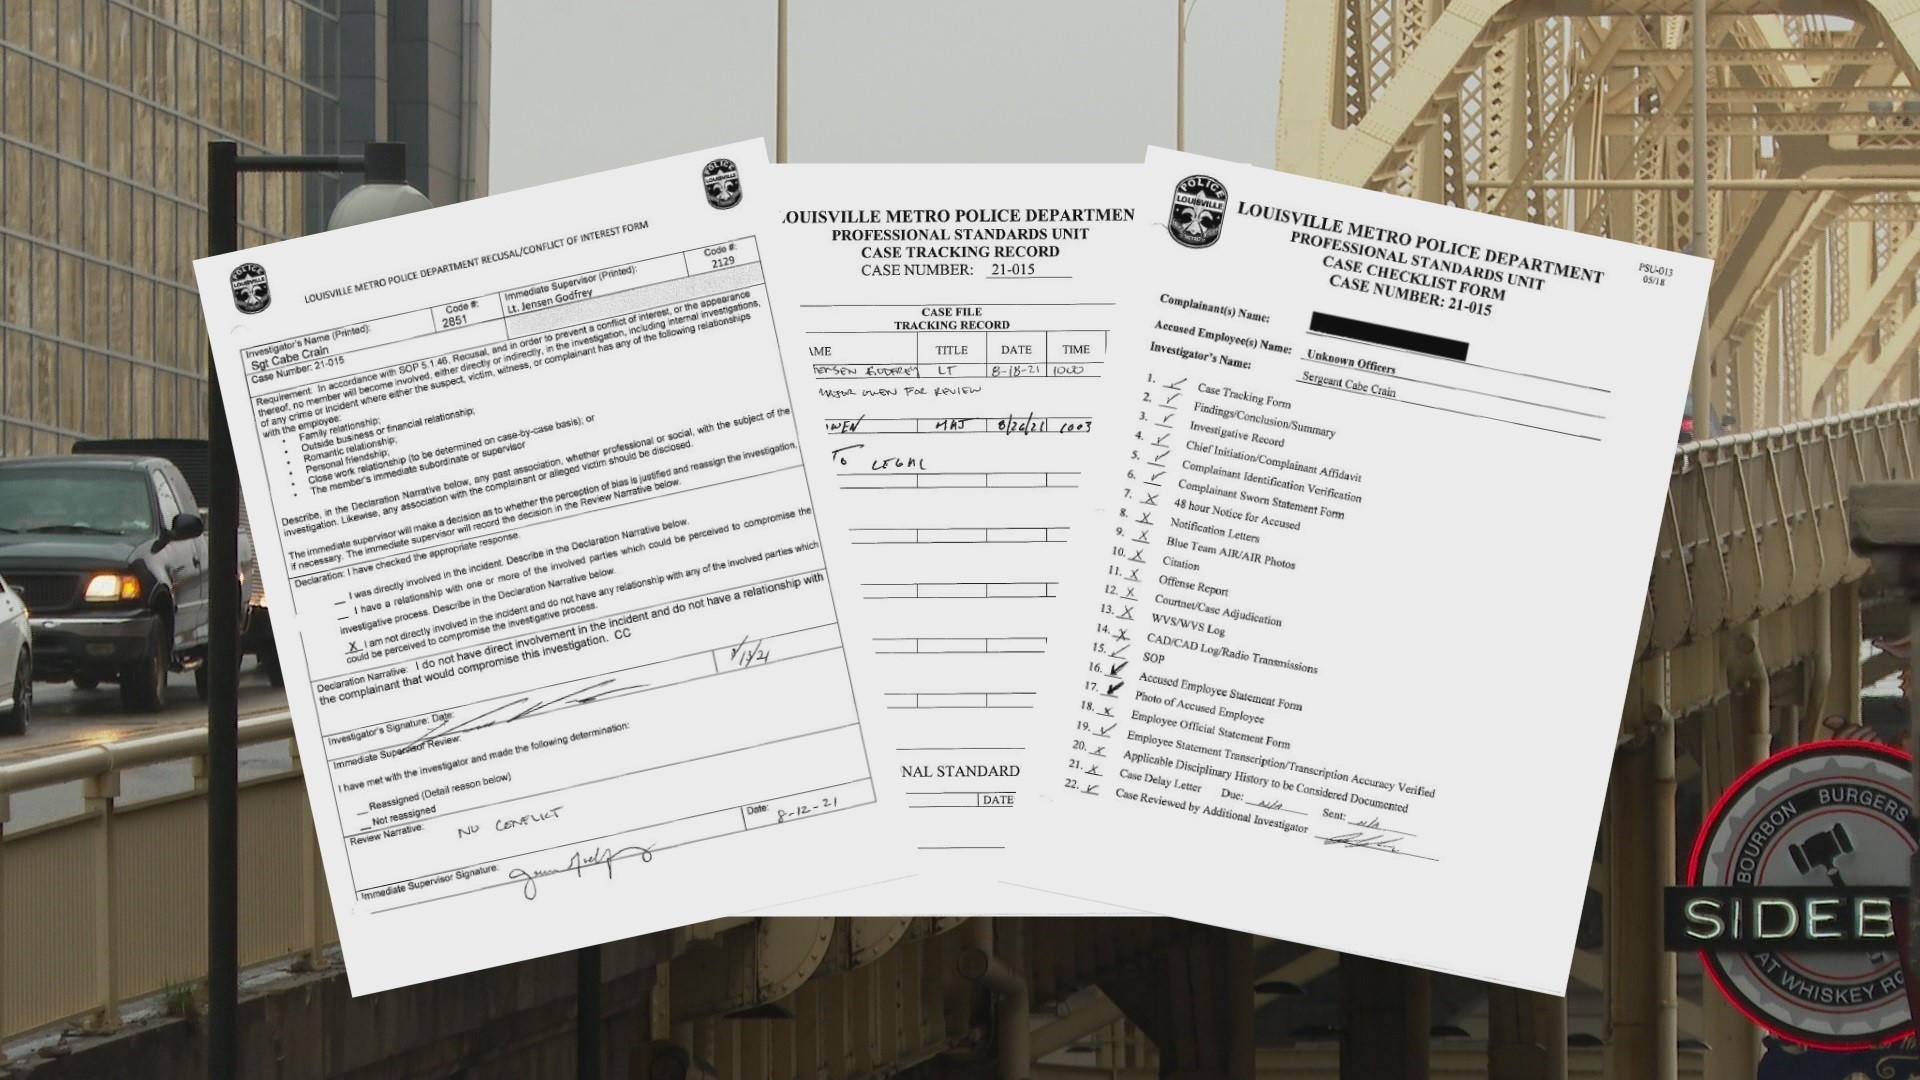 The 200-page report shows no LMPD officers being involved or violated any department policies.